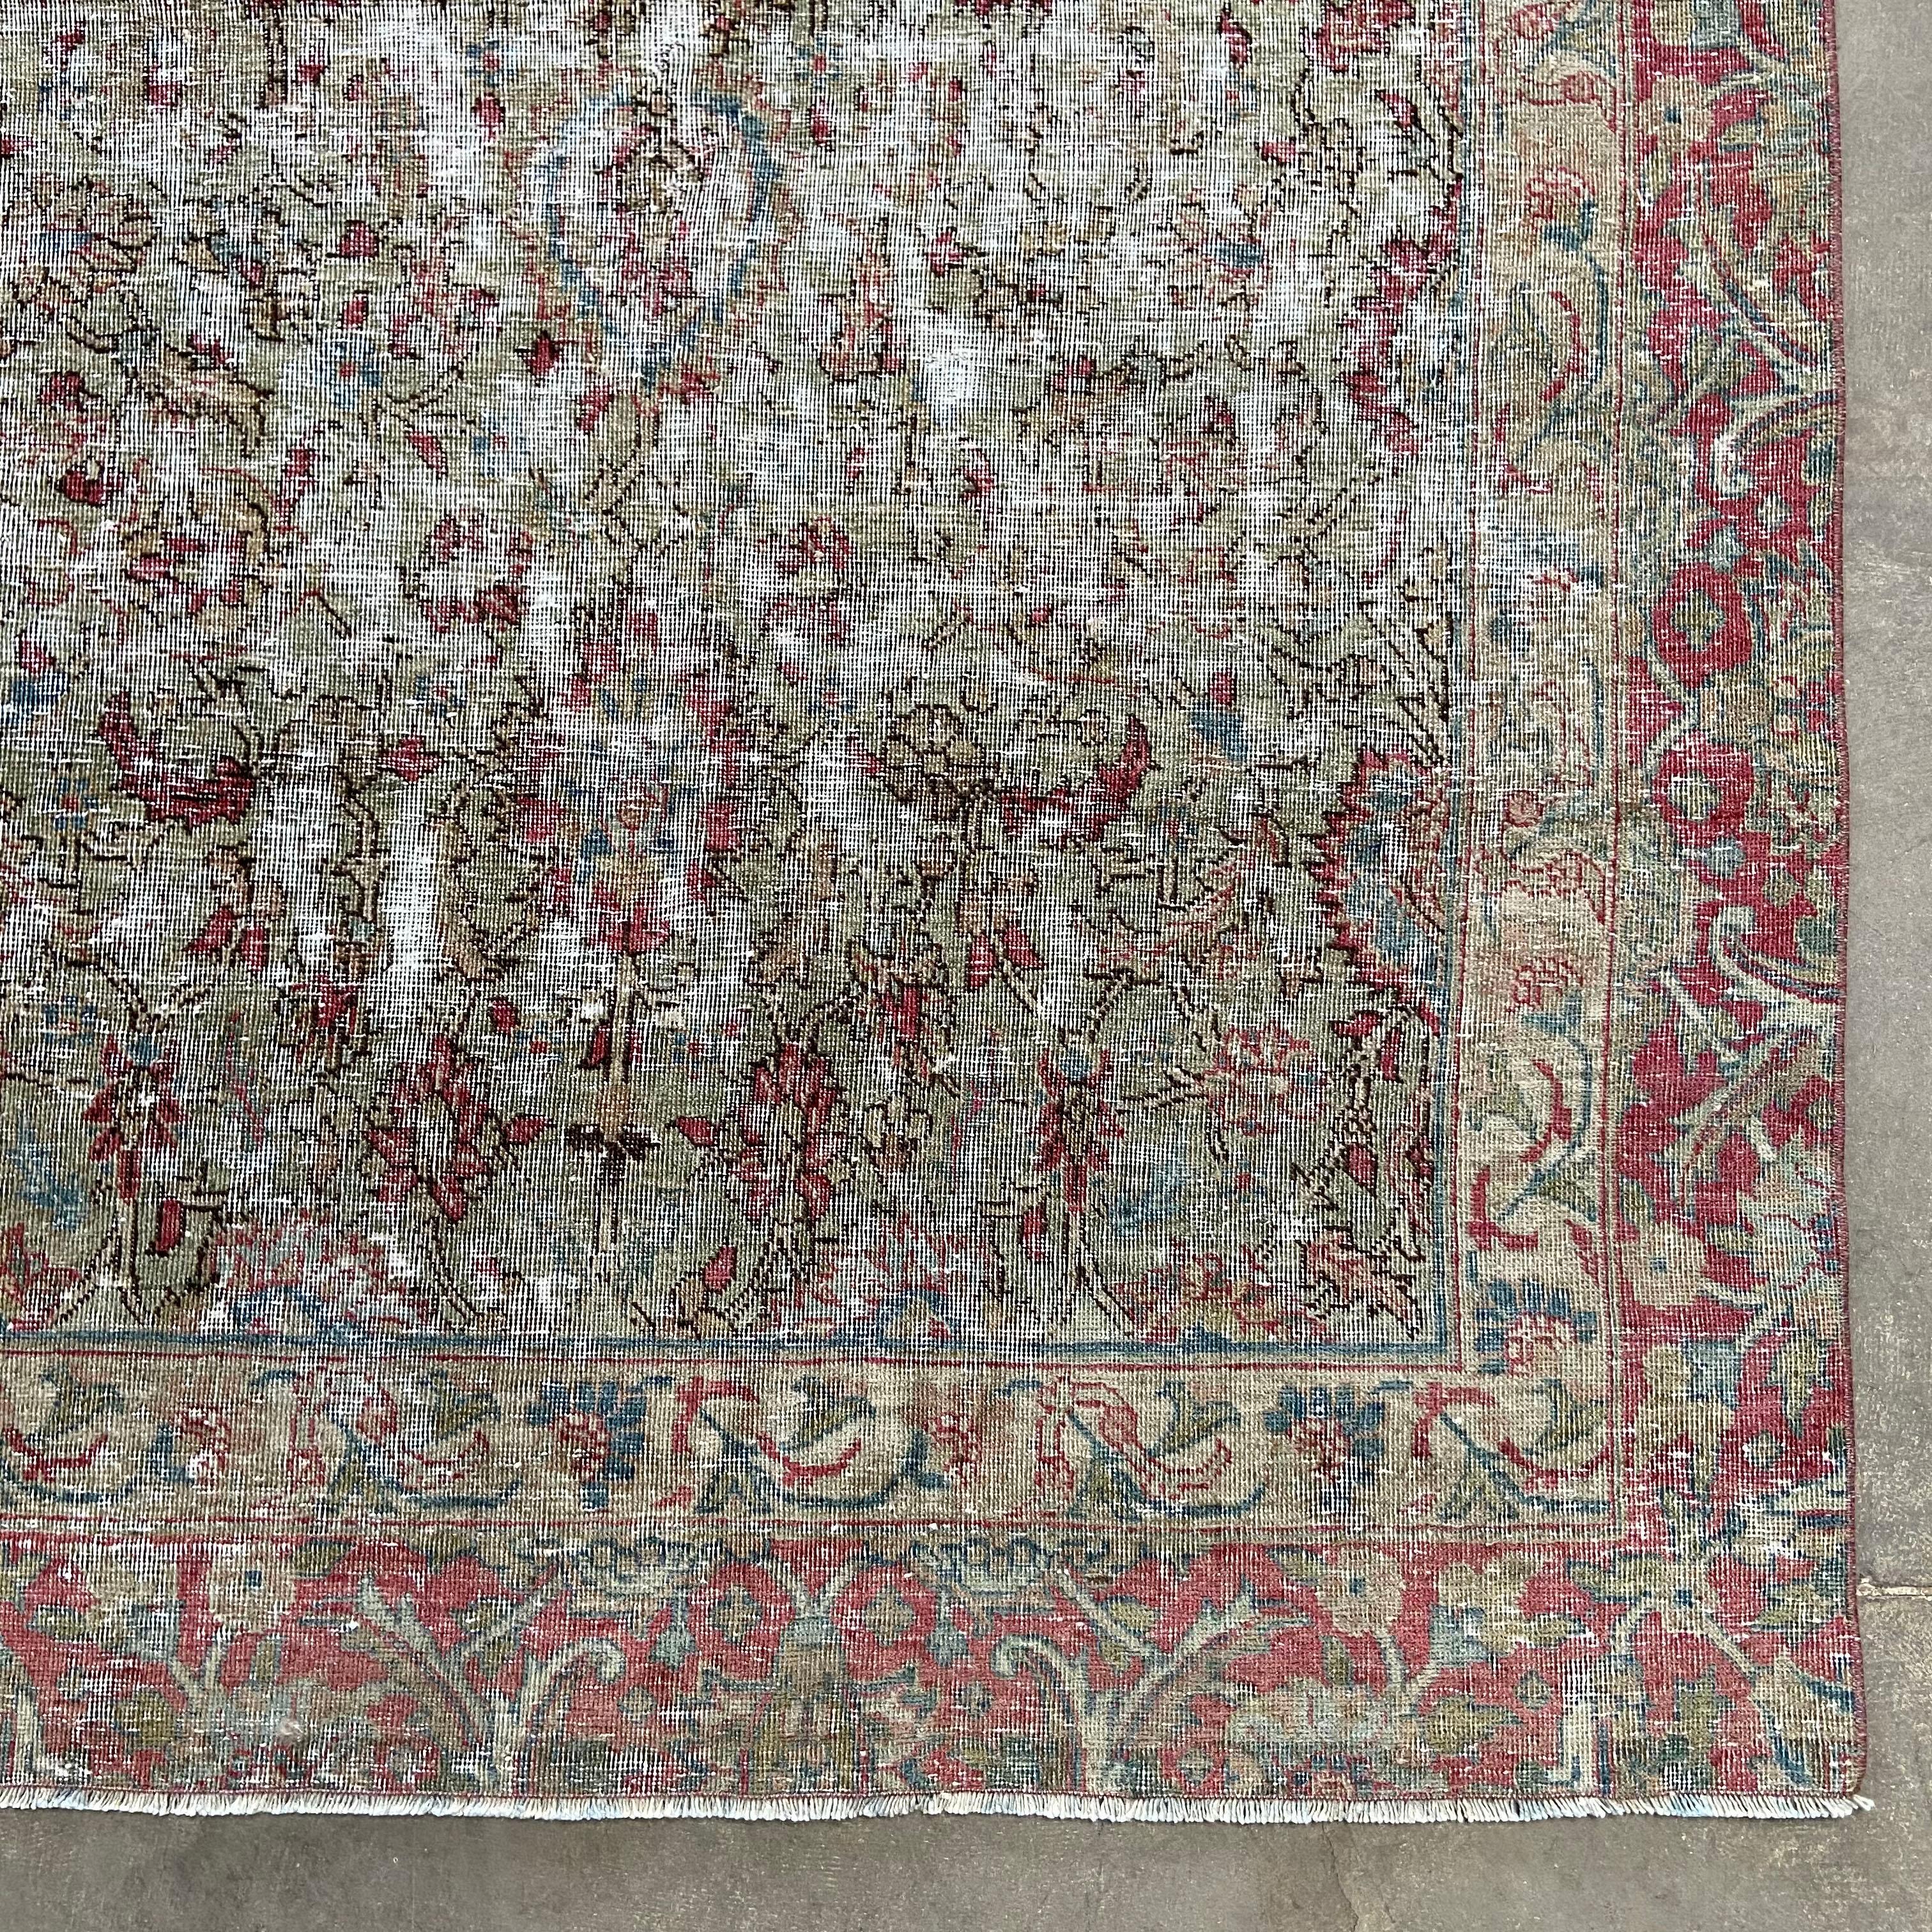 Vintage Turkish rug in faded red and moss greens. The warm colors as well as intricate patterns not only adds character but also makes it truly one-of-a-kind. Some pattern and color variation with vintage items is normal. Beautiful rug has a deep